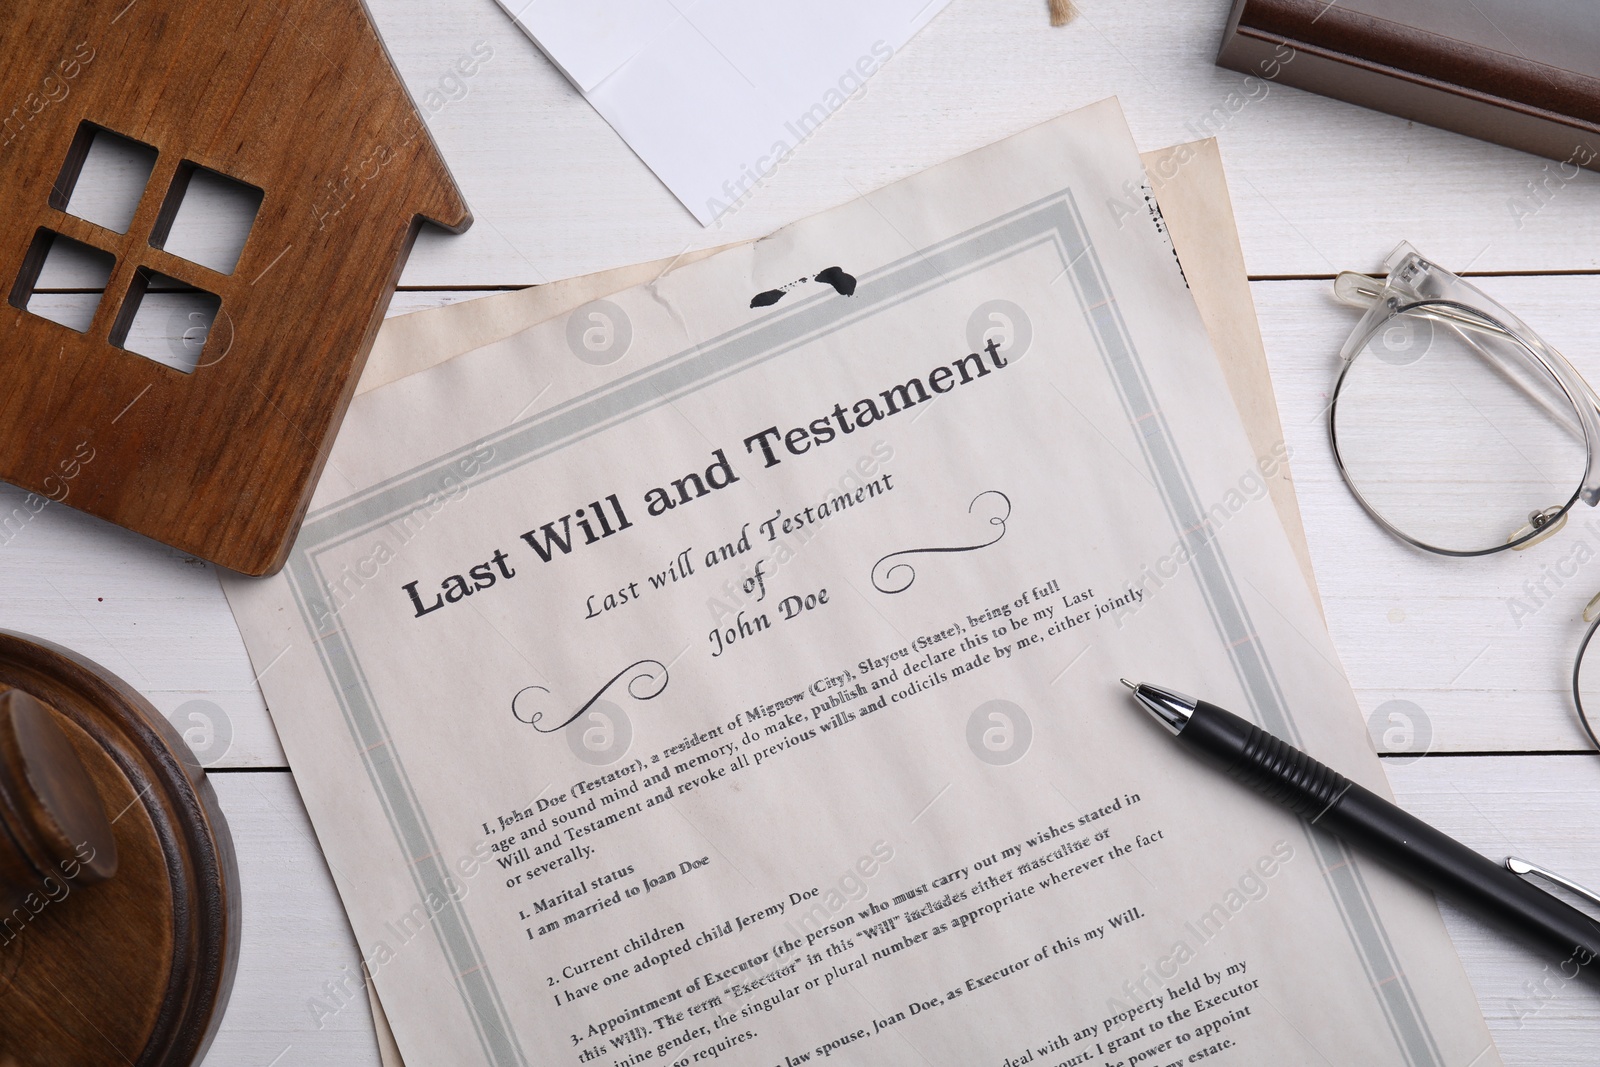 Photo of Last will and testament near house model, glasses, pen on white wooden table, flat lay